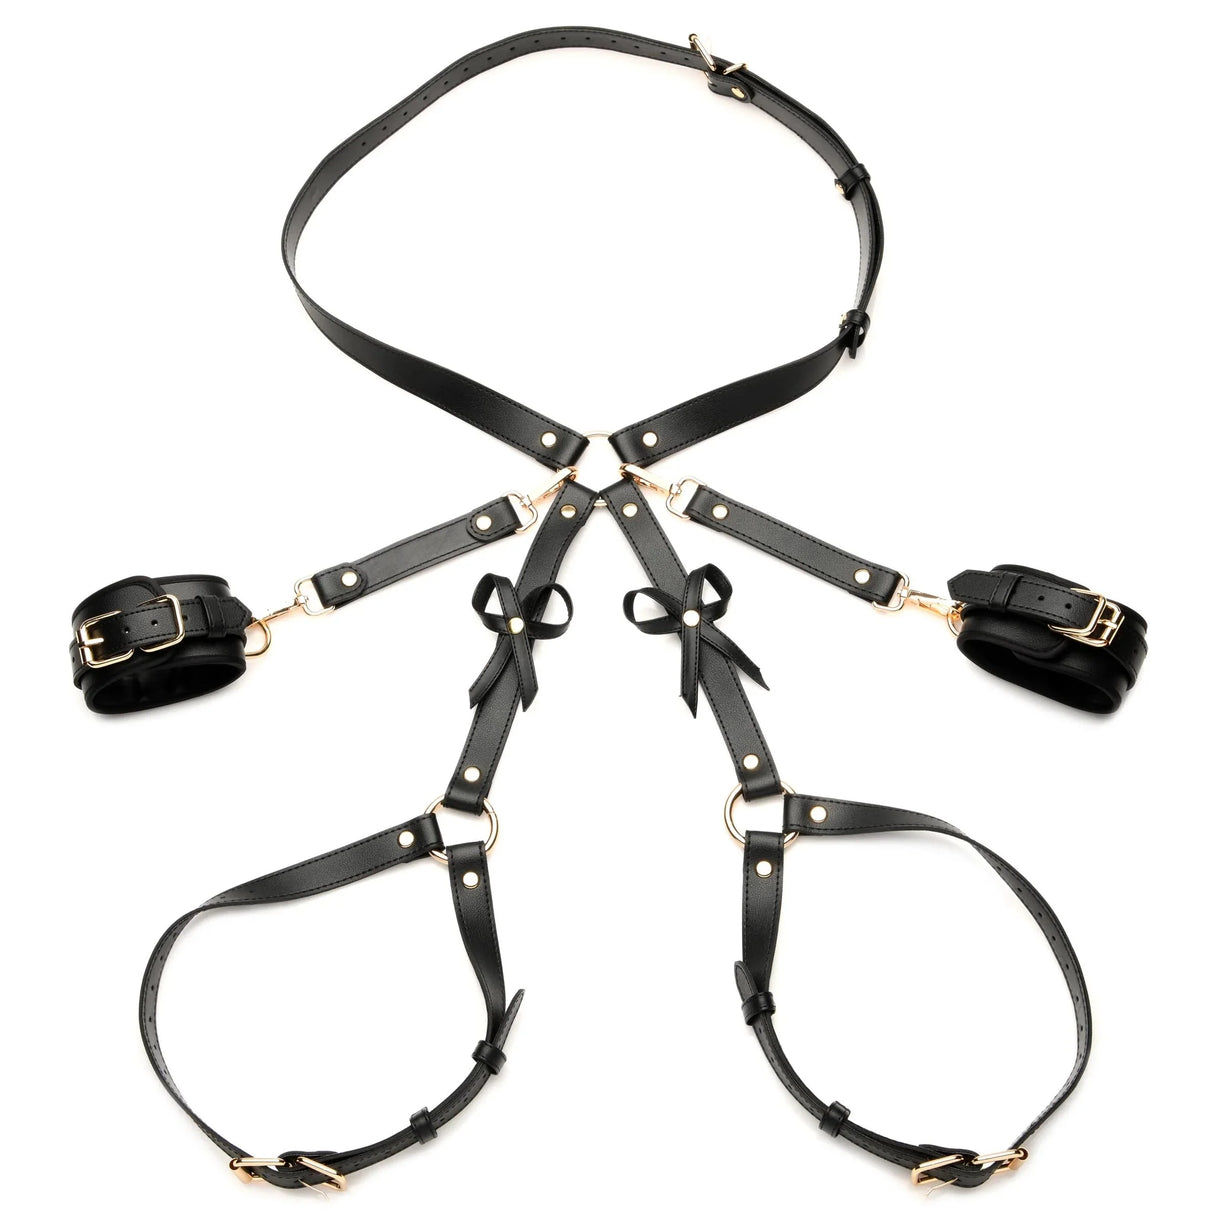 Strict Bondage Thigh Harness with Bows - Black